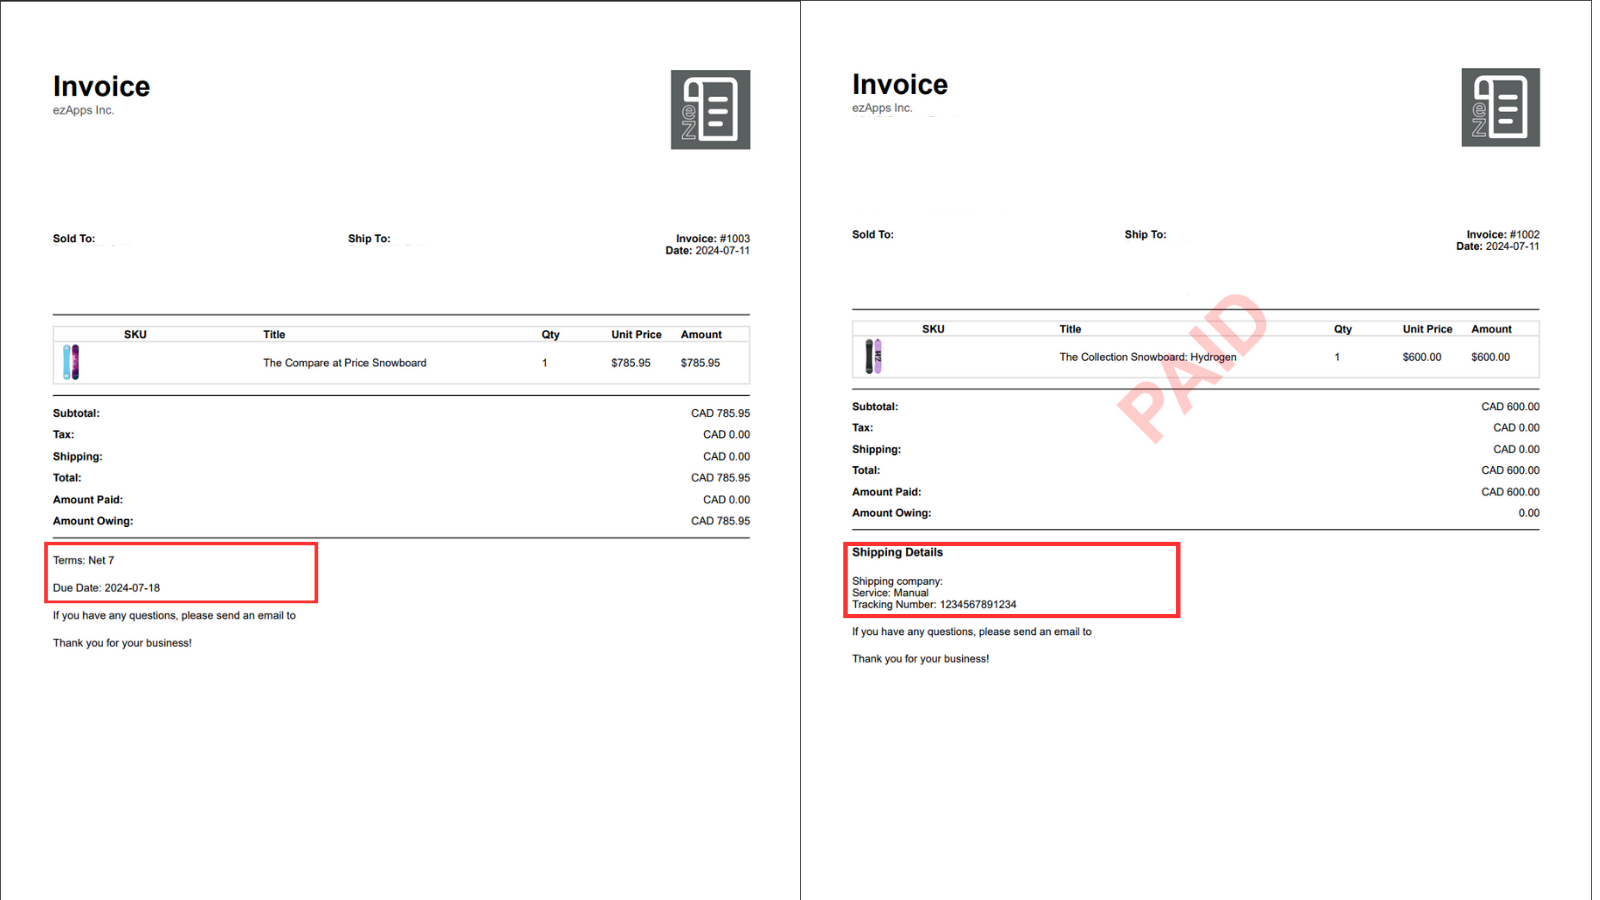 Highlighting the shipment details and payment terms on invoice